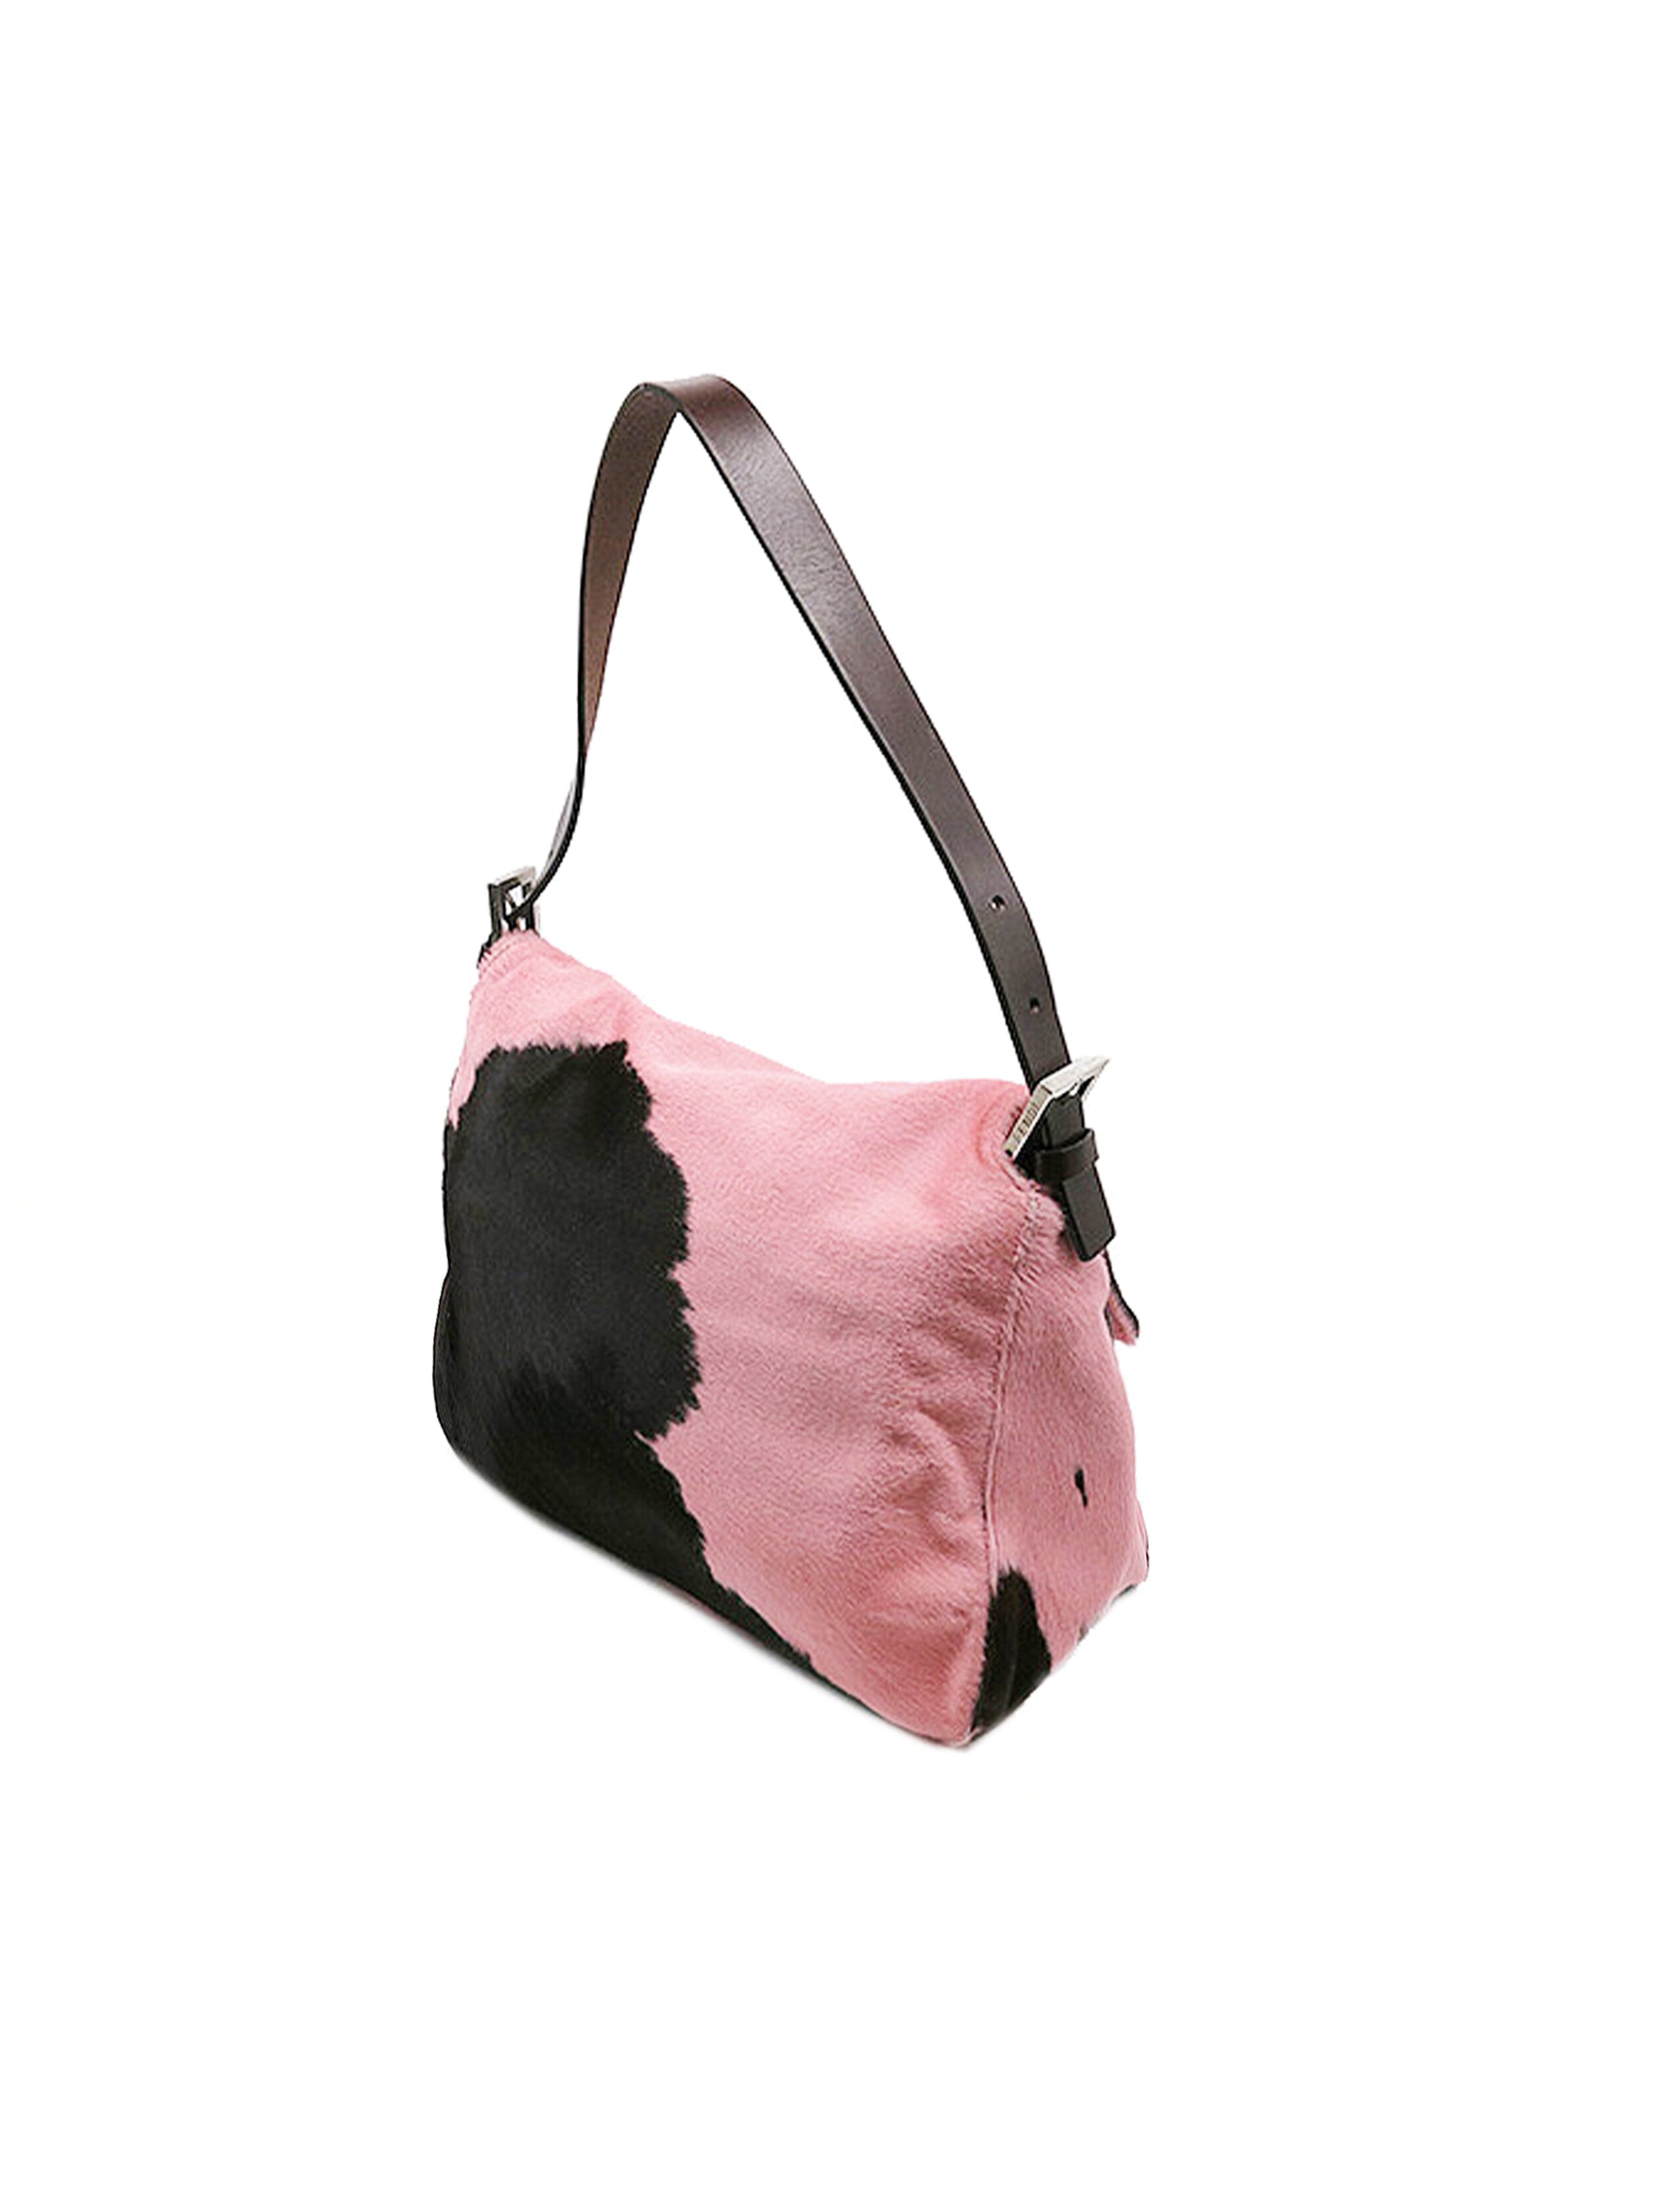 Fendi 2000s Rare Pink and Black Pony Hair Baguette